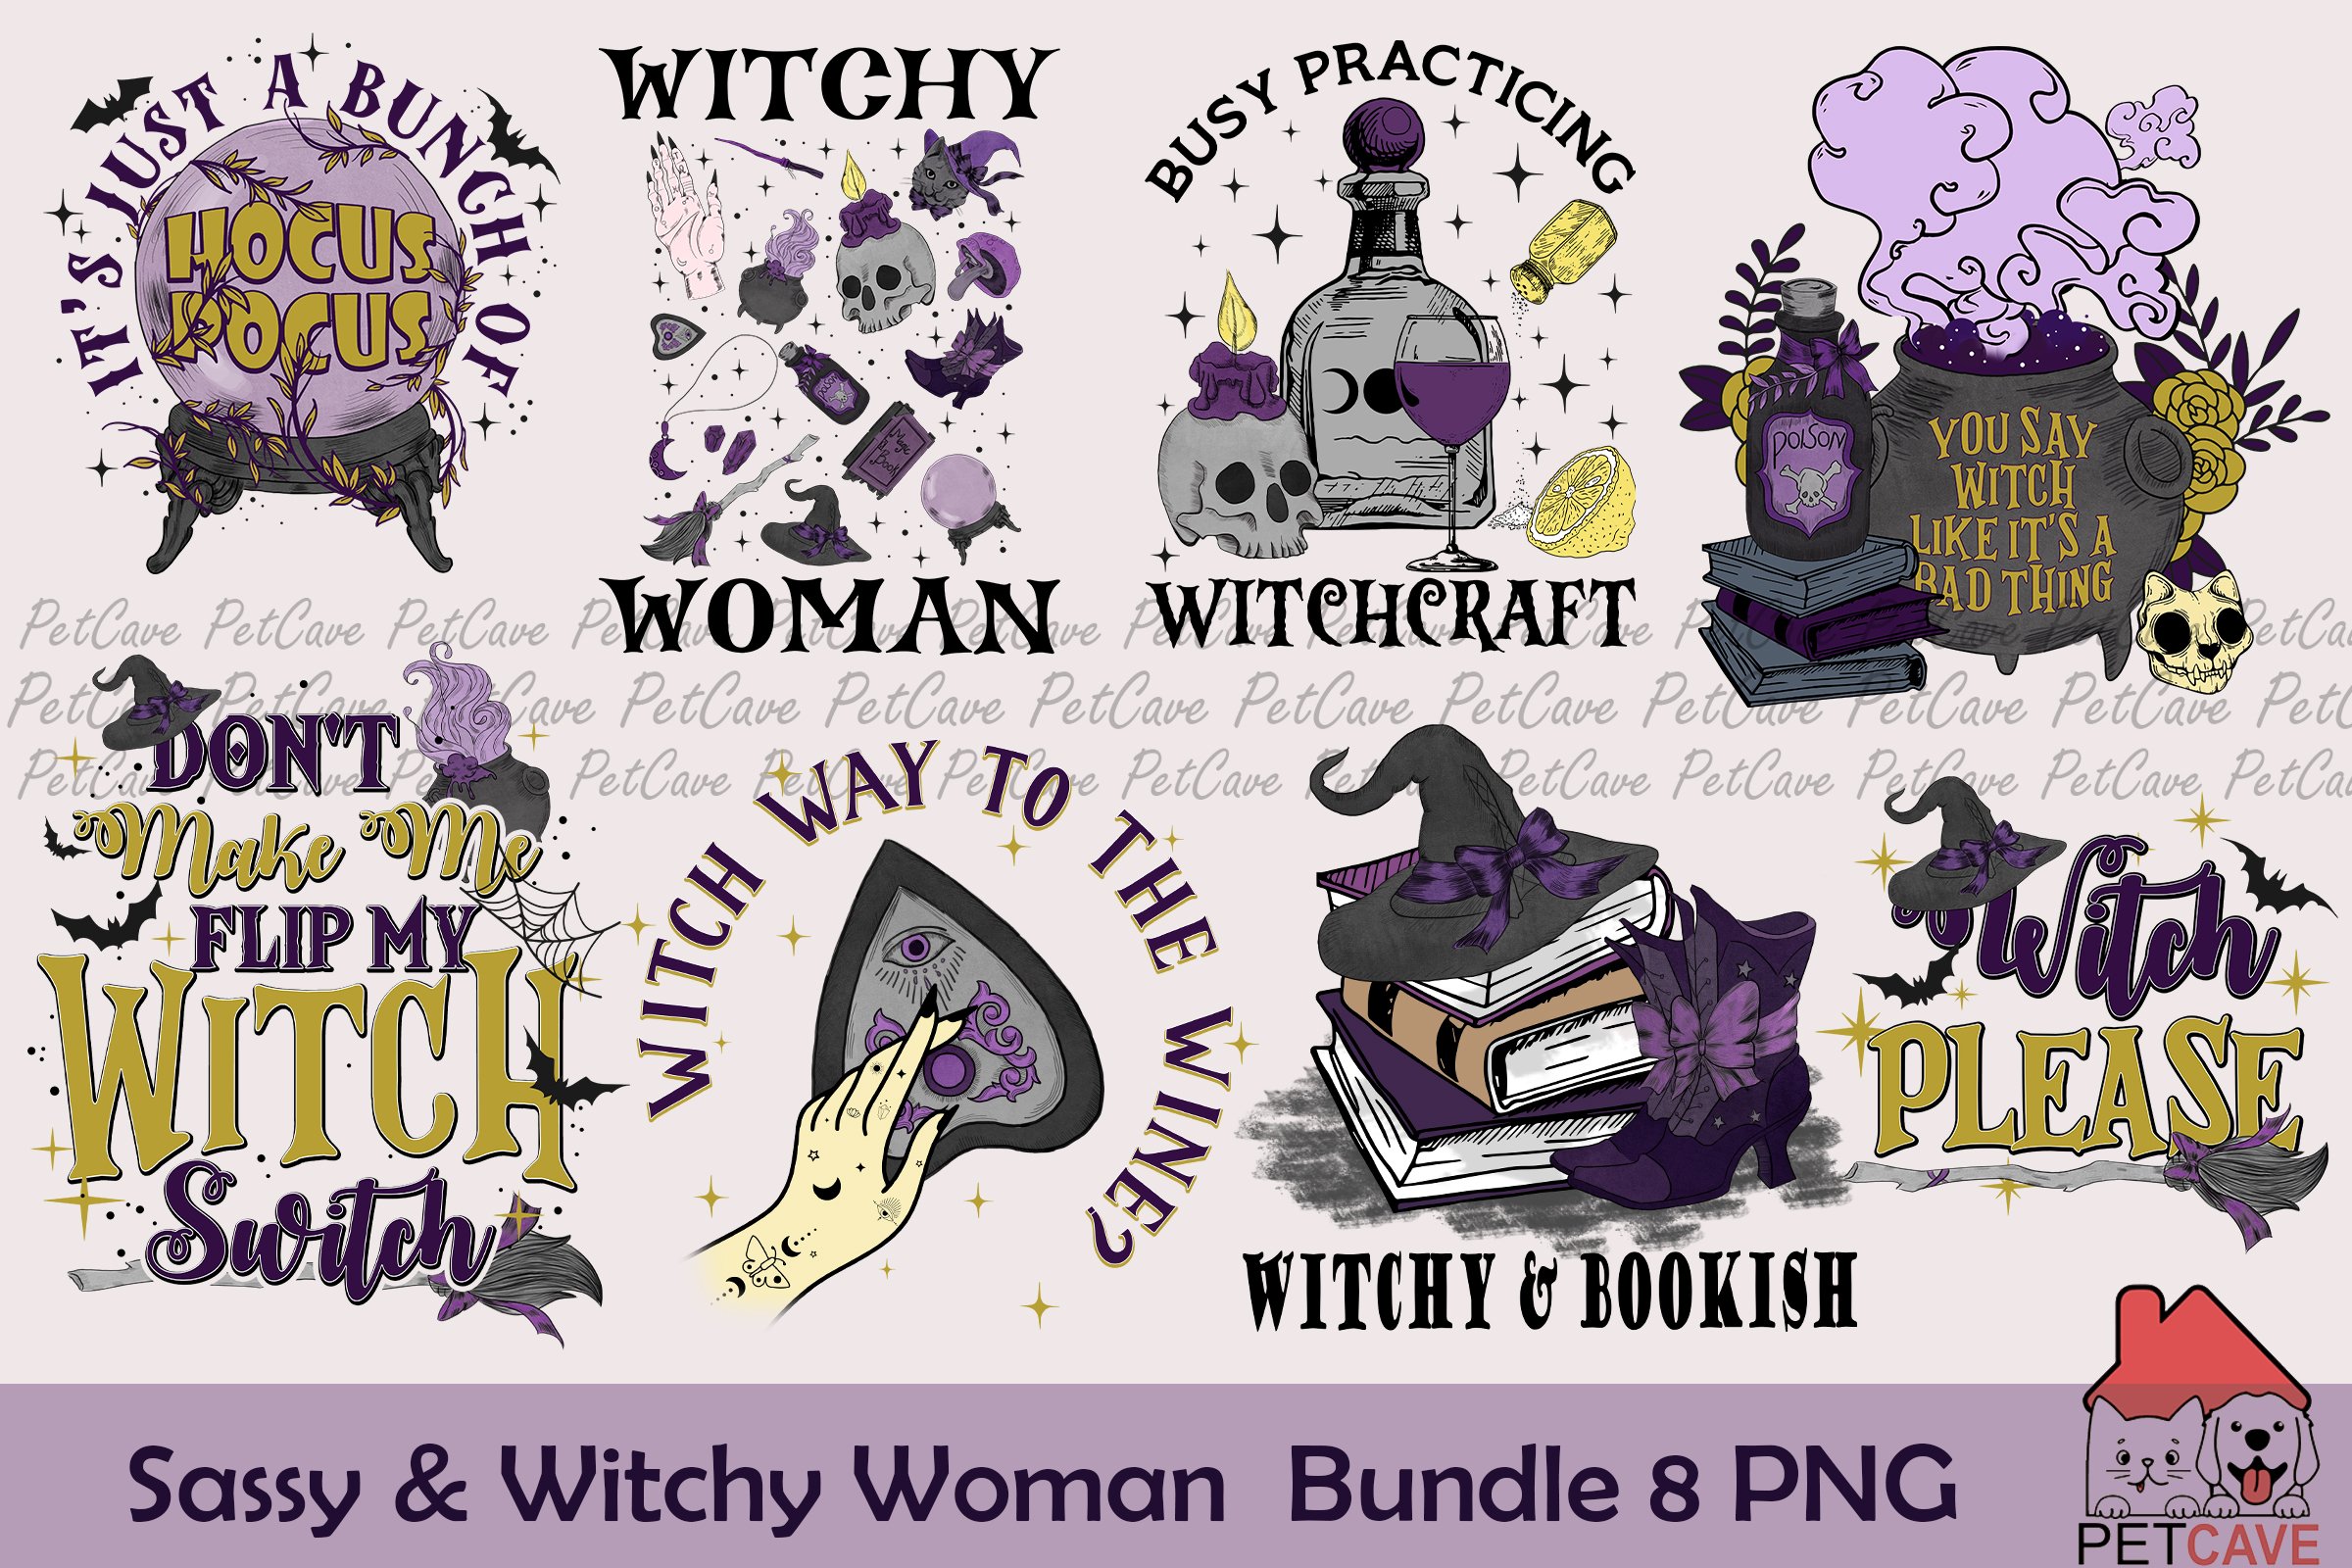 Sassy & Witchy Woman Bundle cover image.